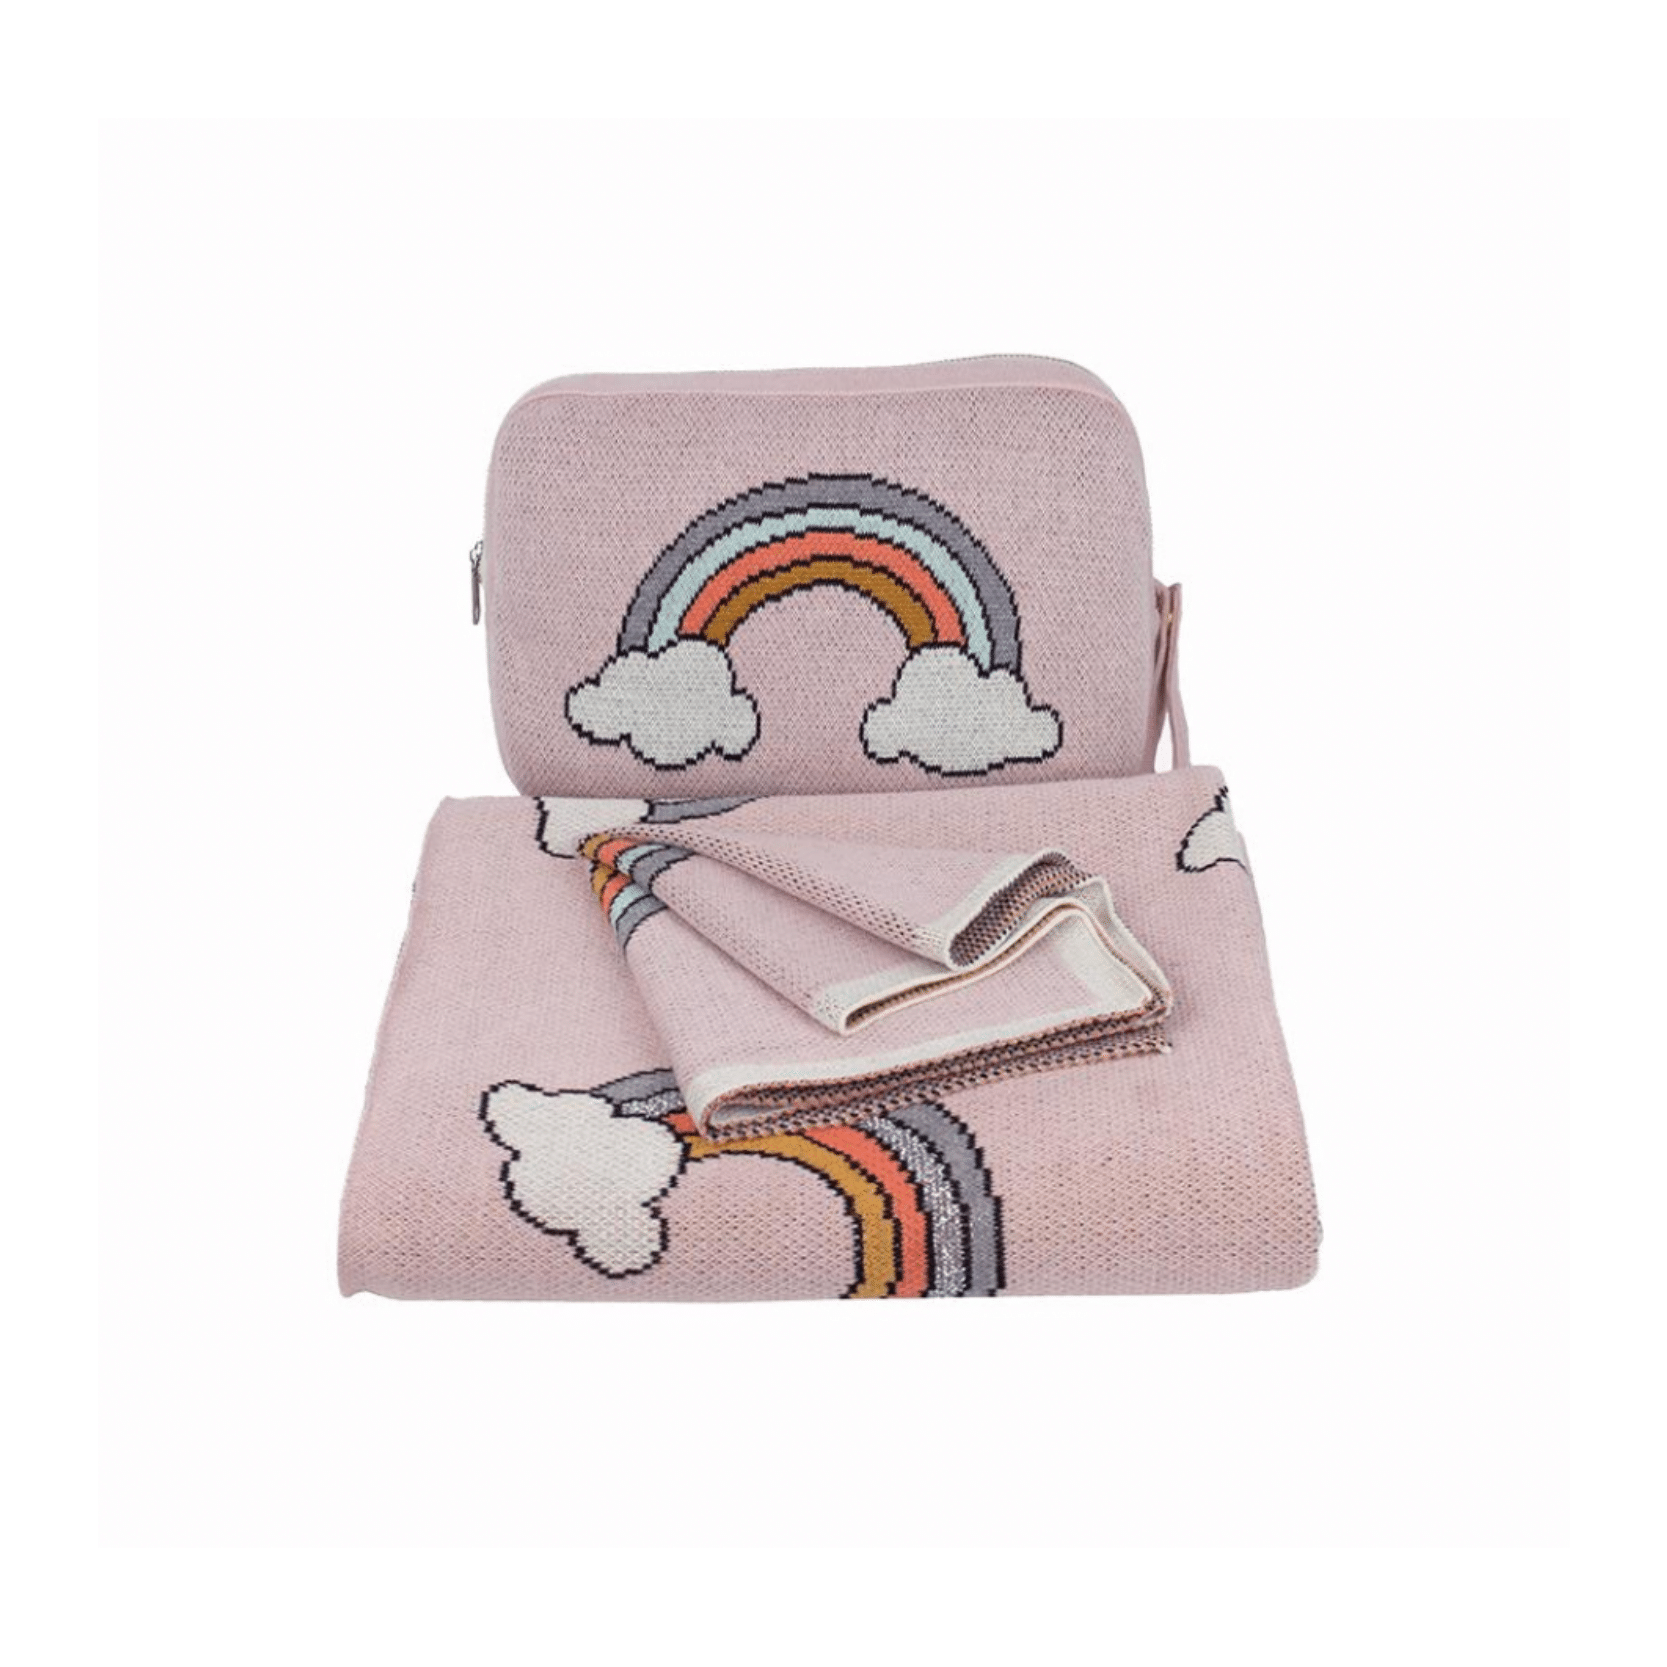 Personalized Baby Travel Set Pink / Silver Rainbow 3 Piece Knitted - Give Wink